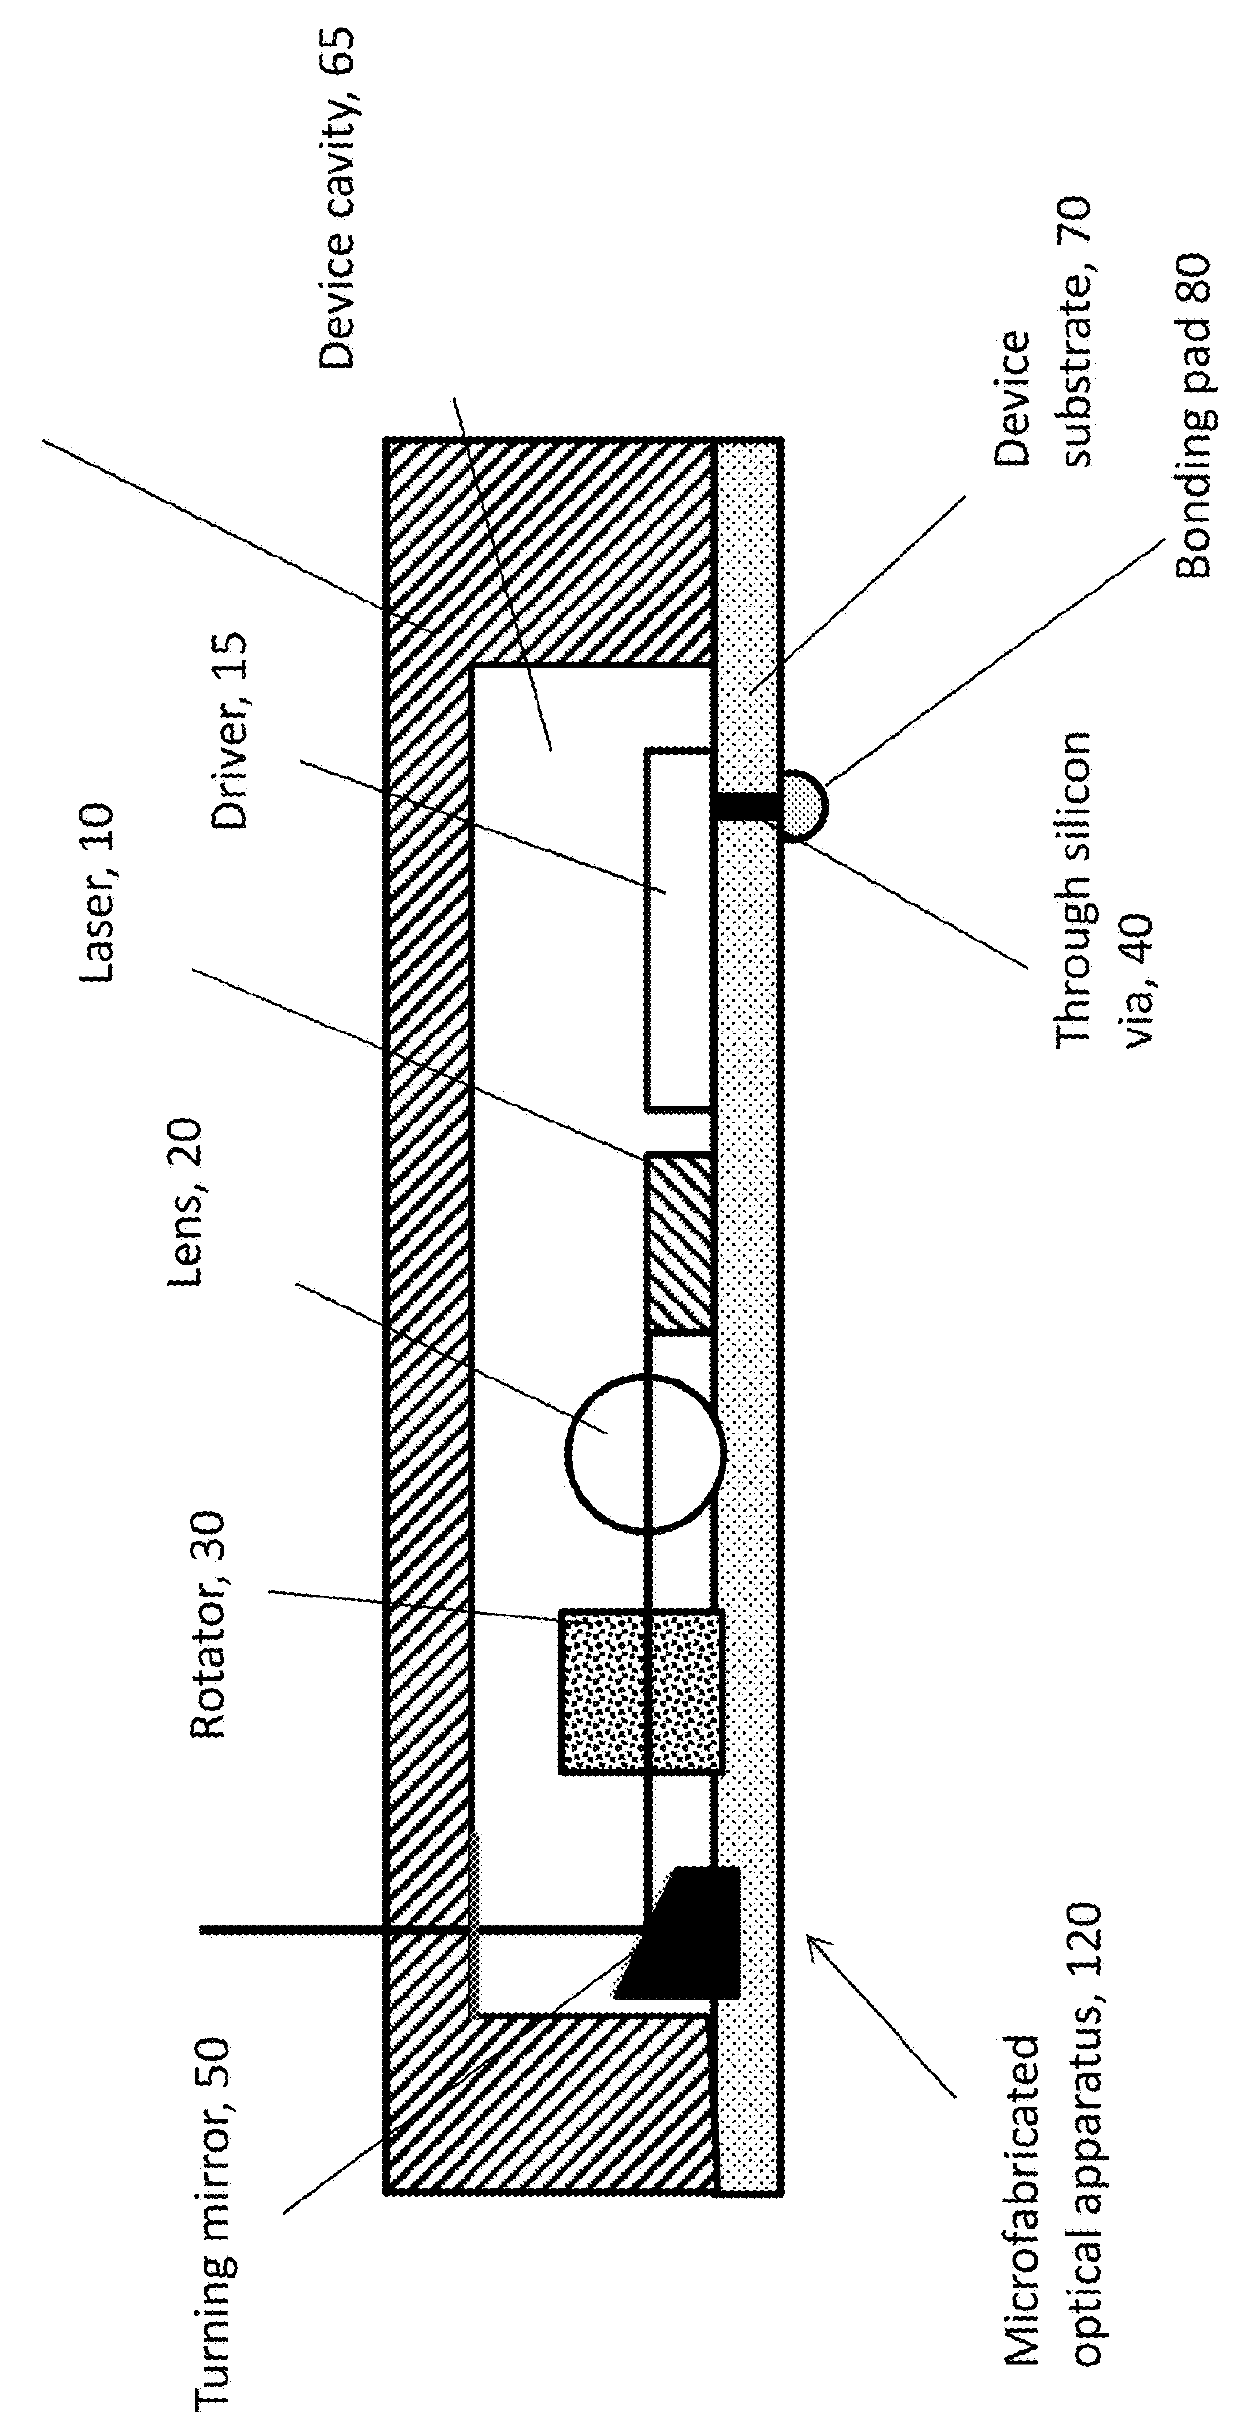 Microfabricated optical apparatus with flexible electrical connector